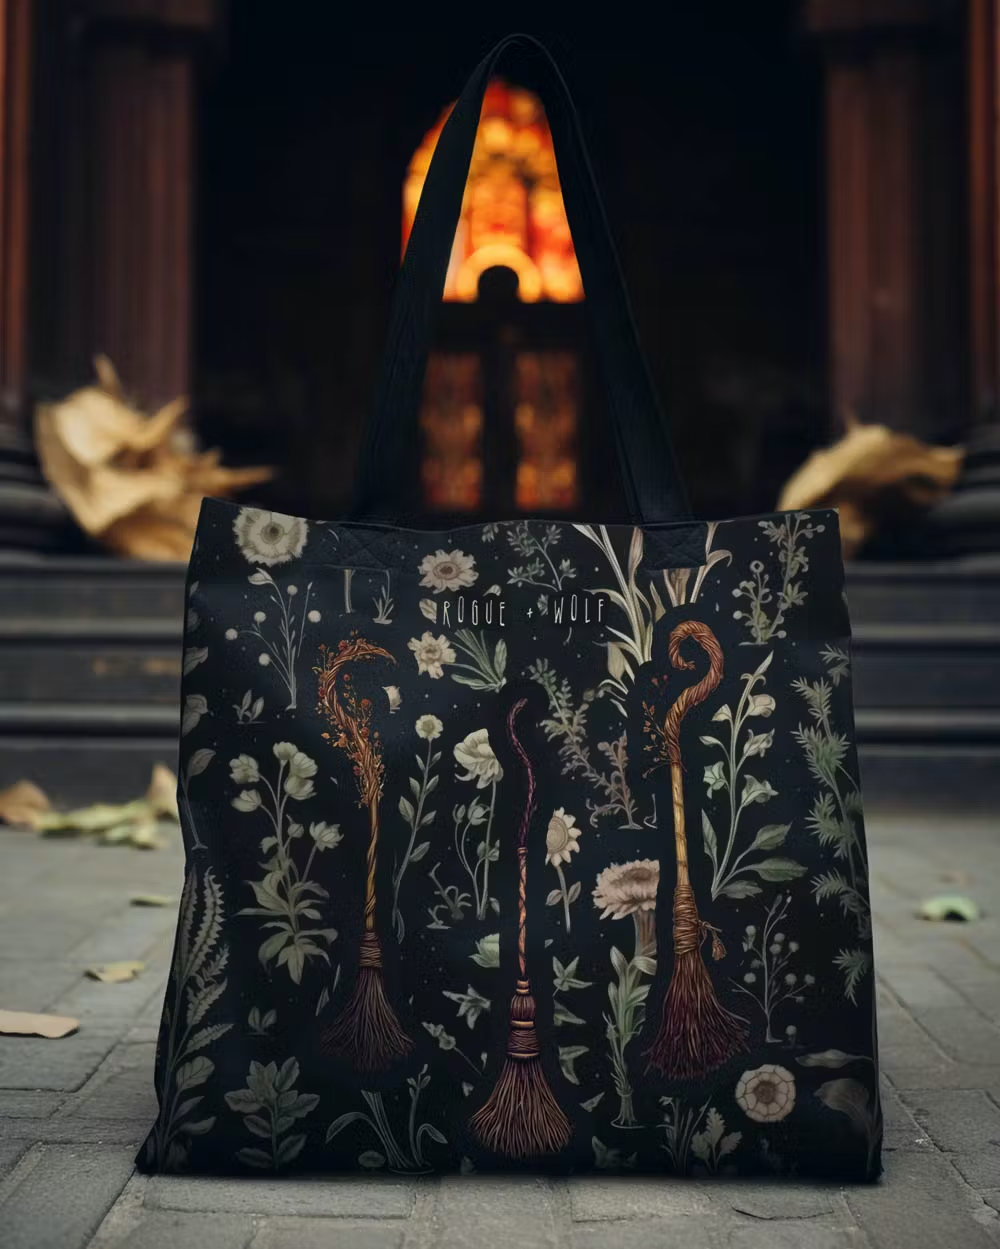 Witches' Broomsticks Cotton Vegan Tote Bag for Women - Dark Academia Witchy Botanical Large Foldable Bag for Travel Work Gym, Goth Gifts